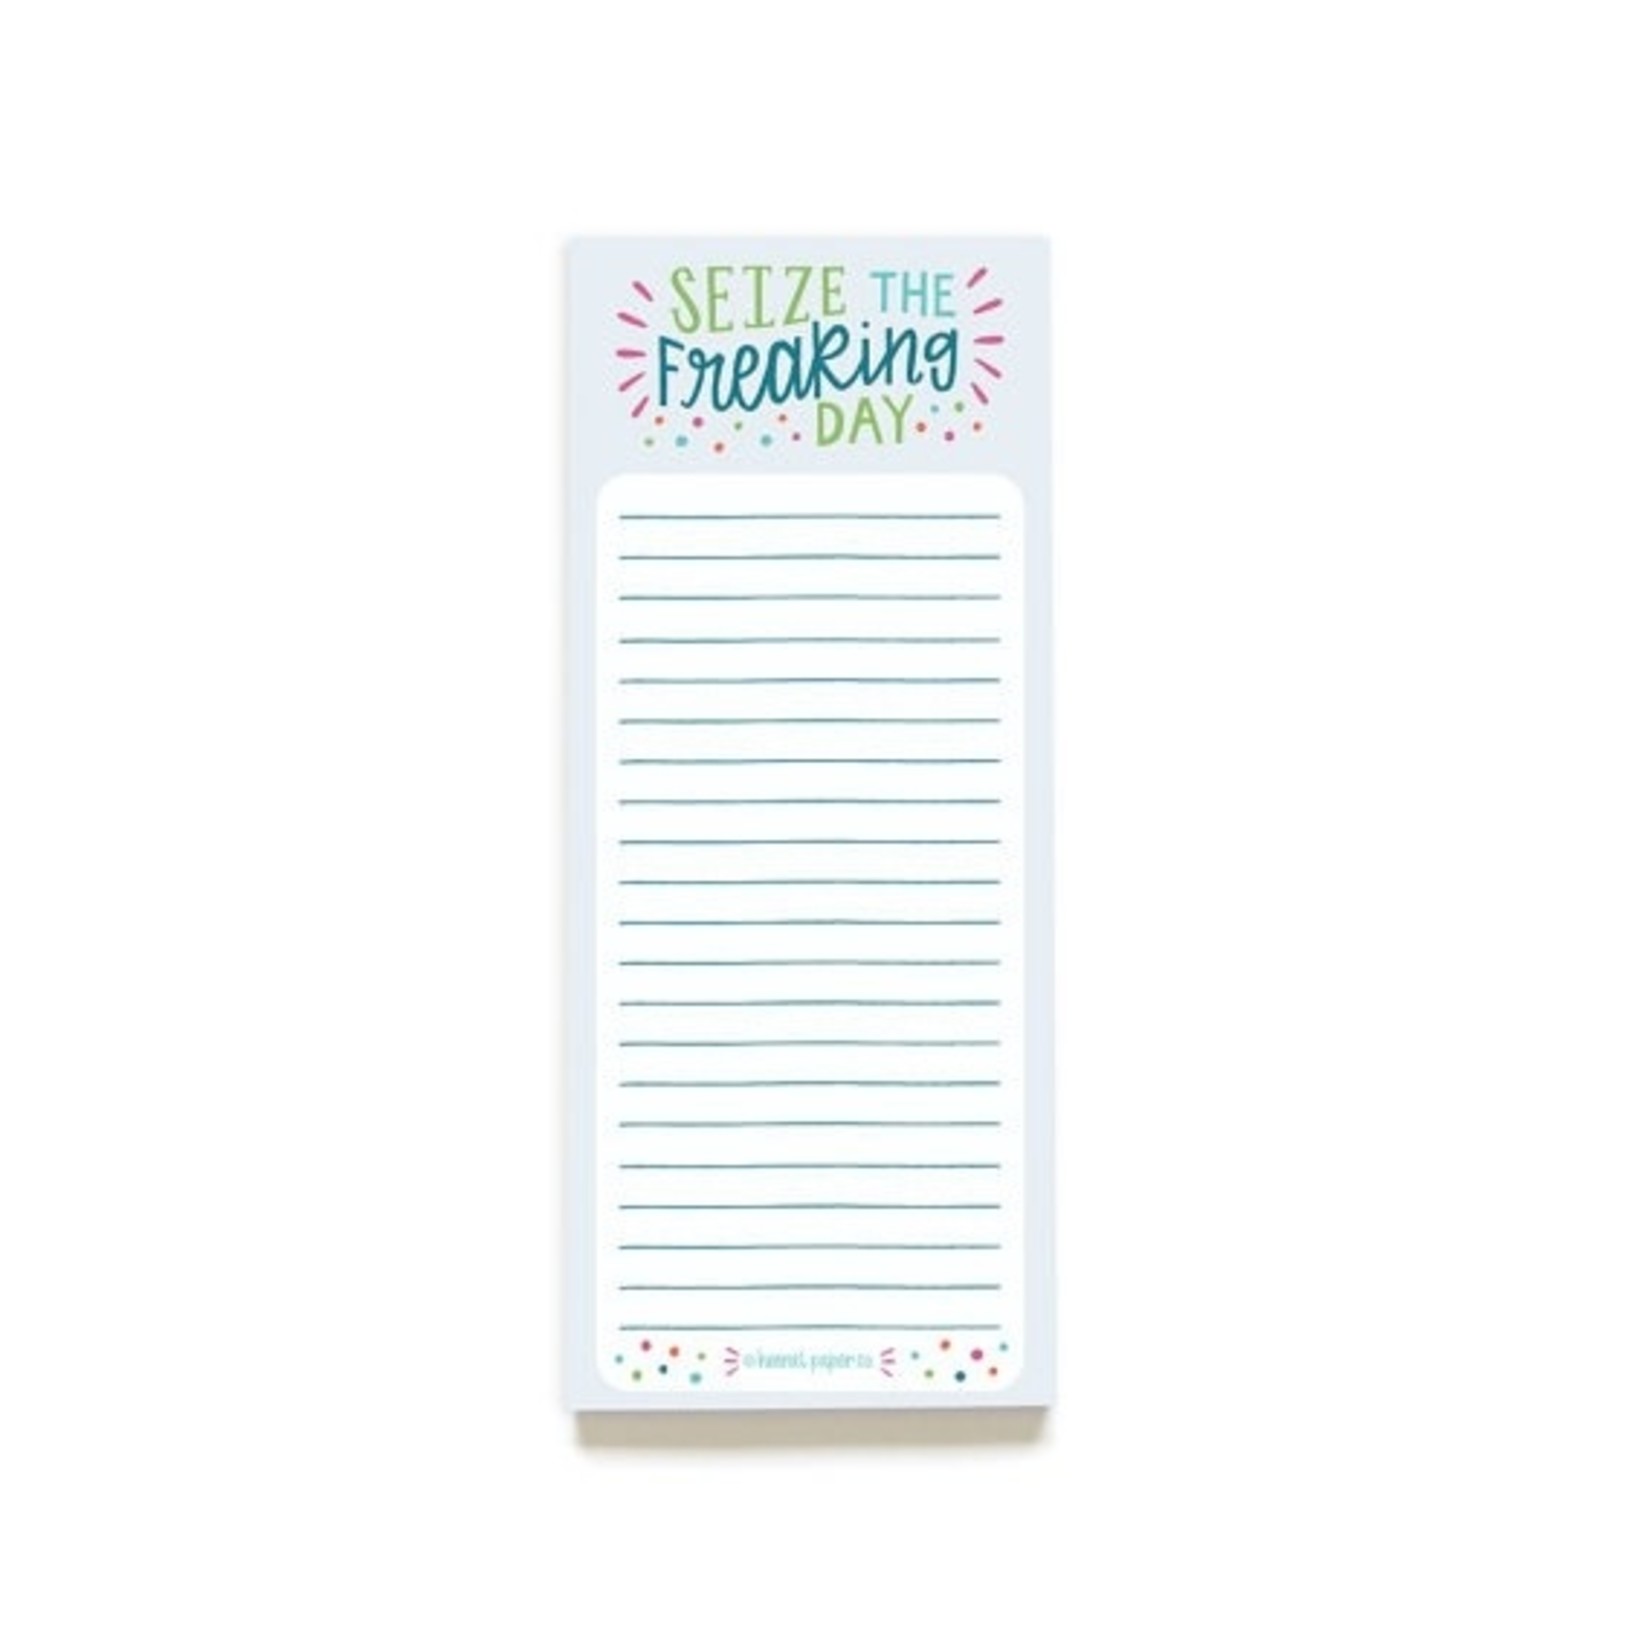 Seize the Freaking Day Notepad